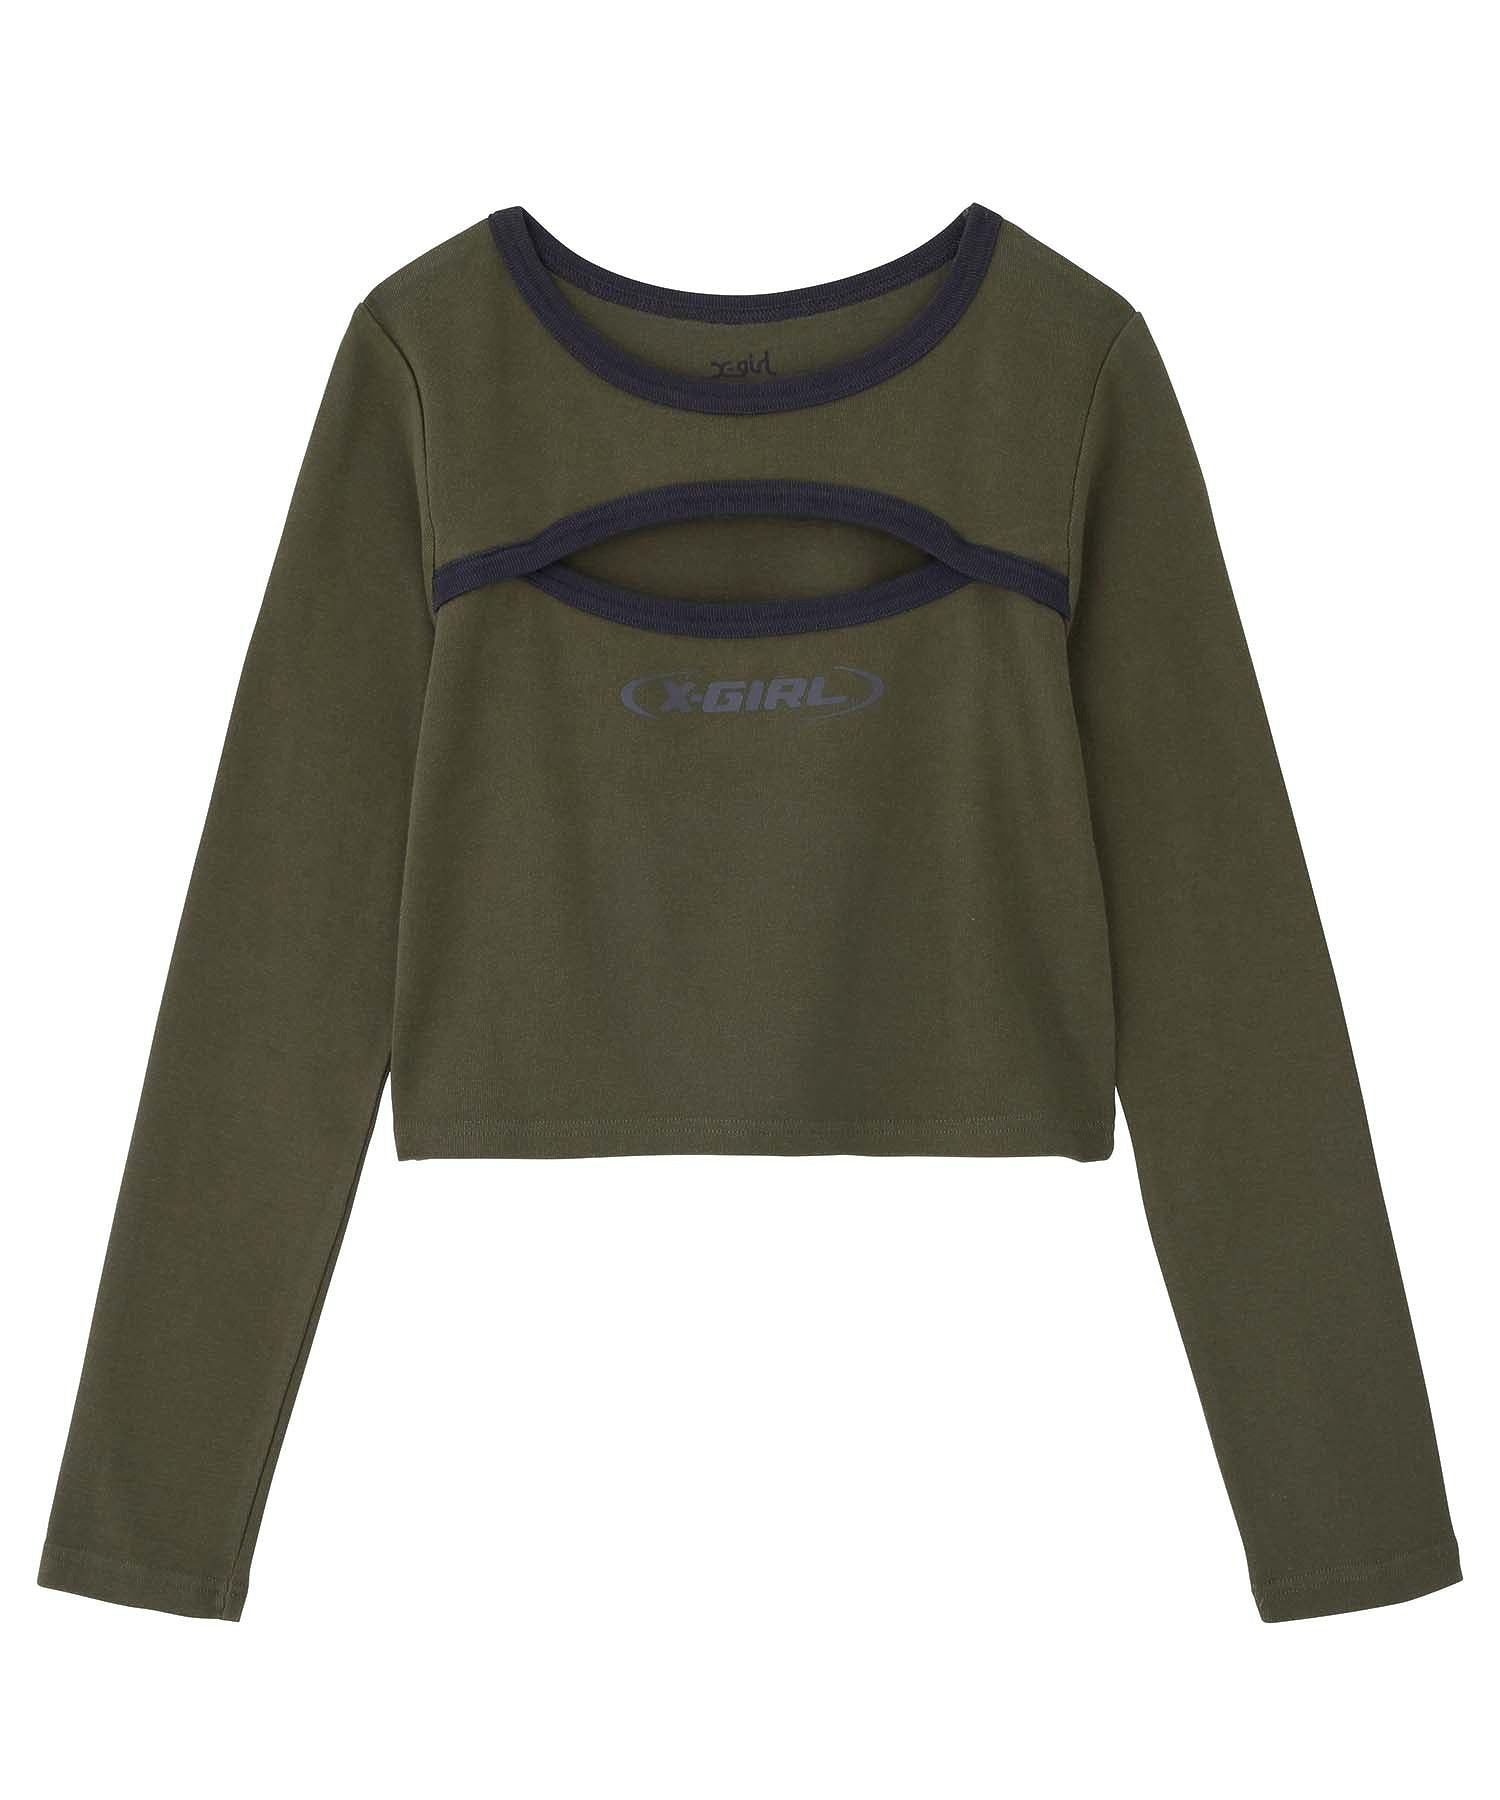 FRONT CUTOUT L/S BABY TEE X-girl – calif